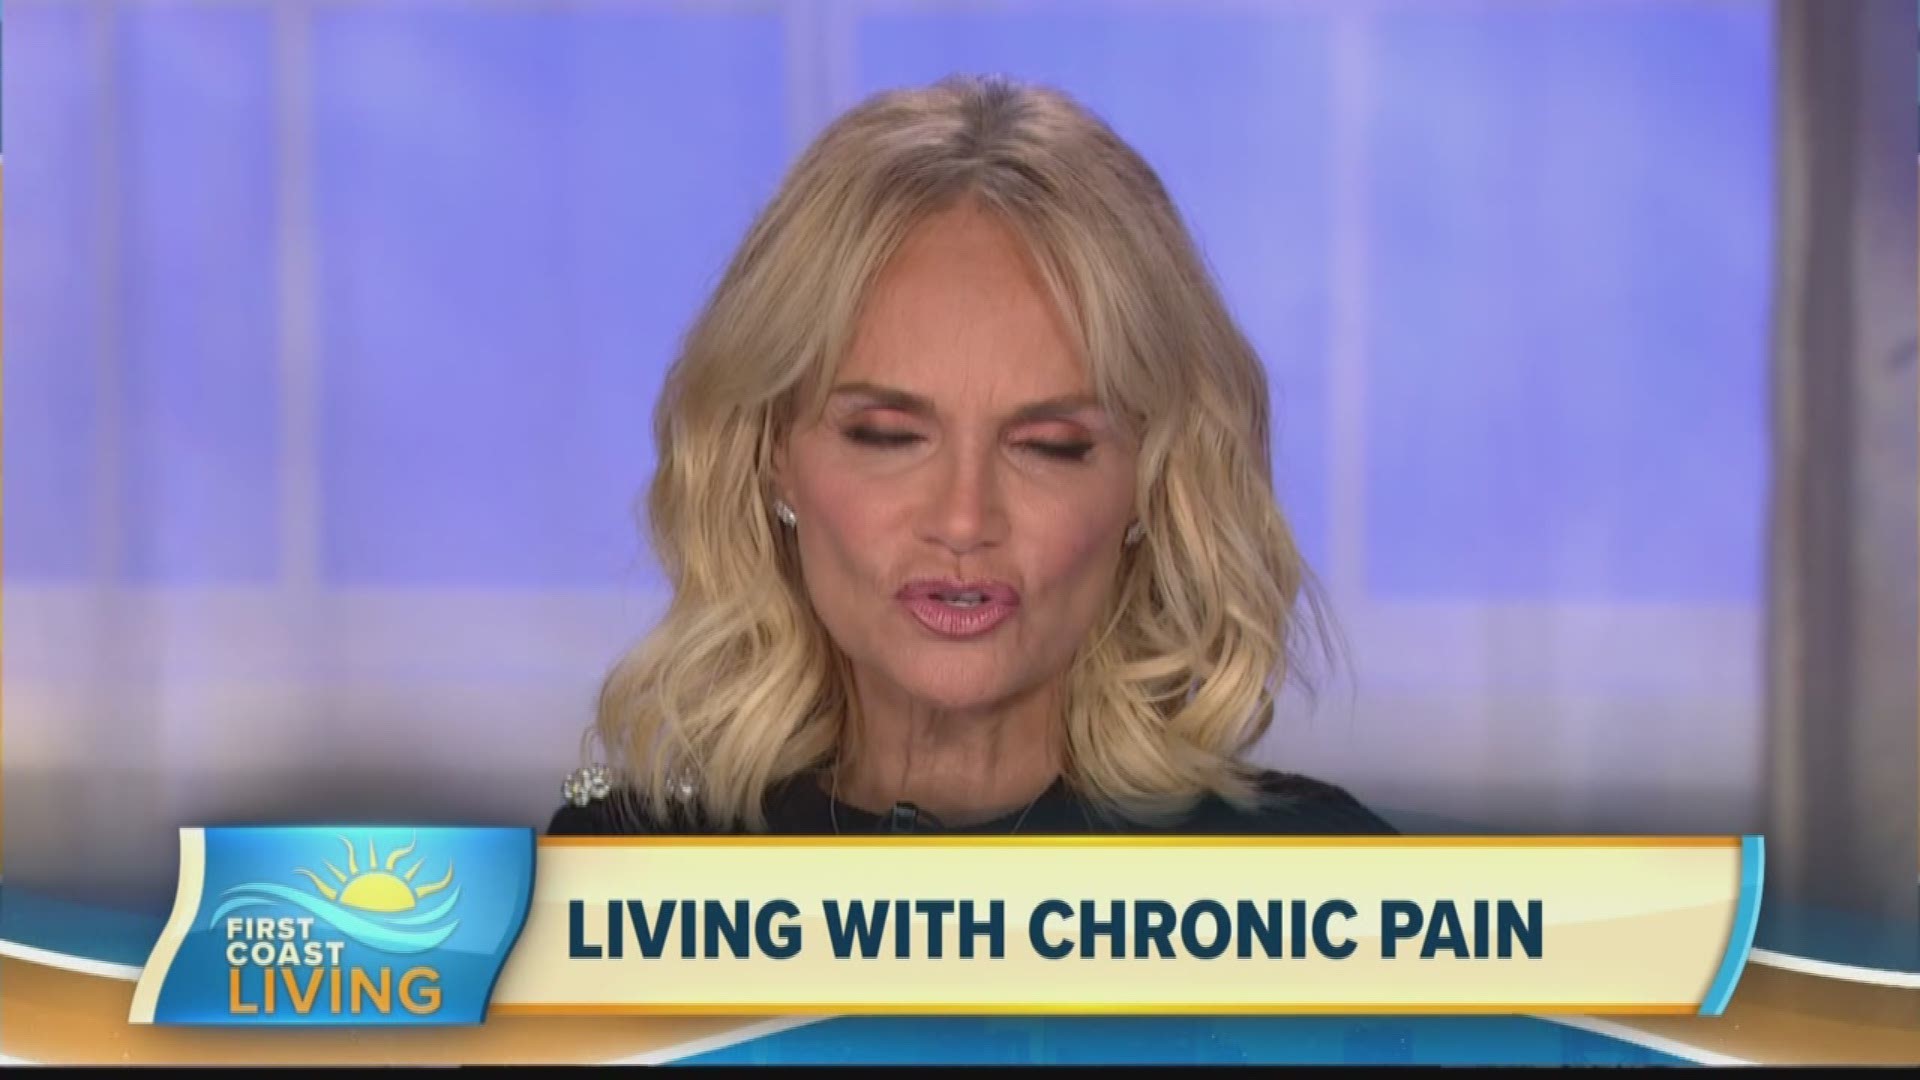 Broadway star wants people who are living with chronic pain to know they are not alone!